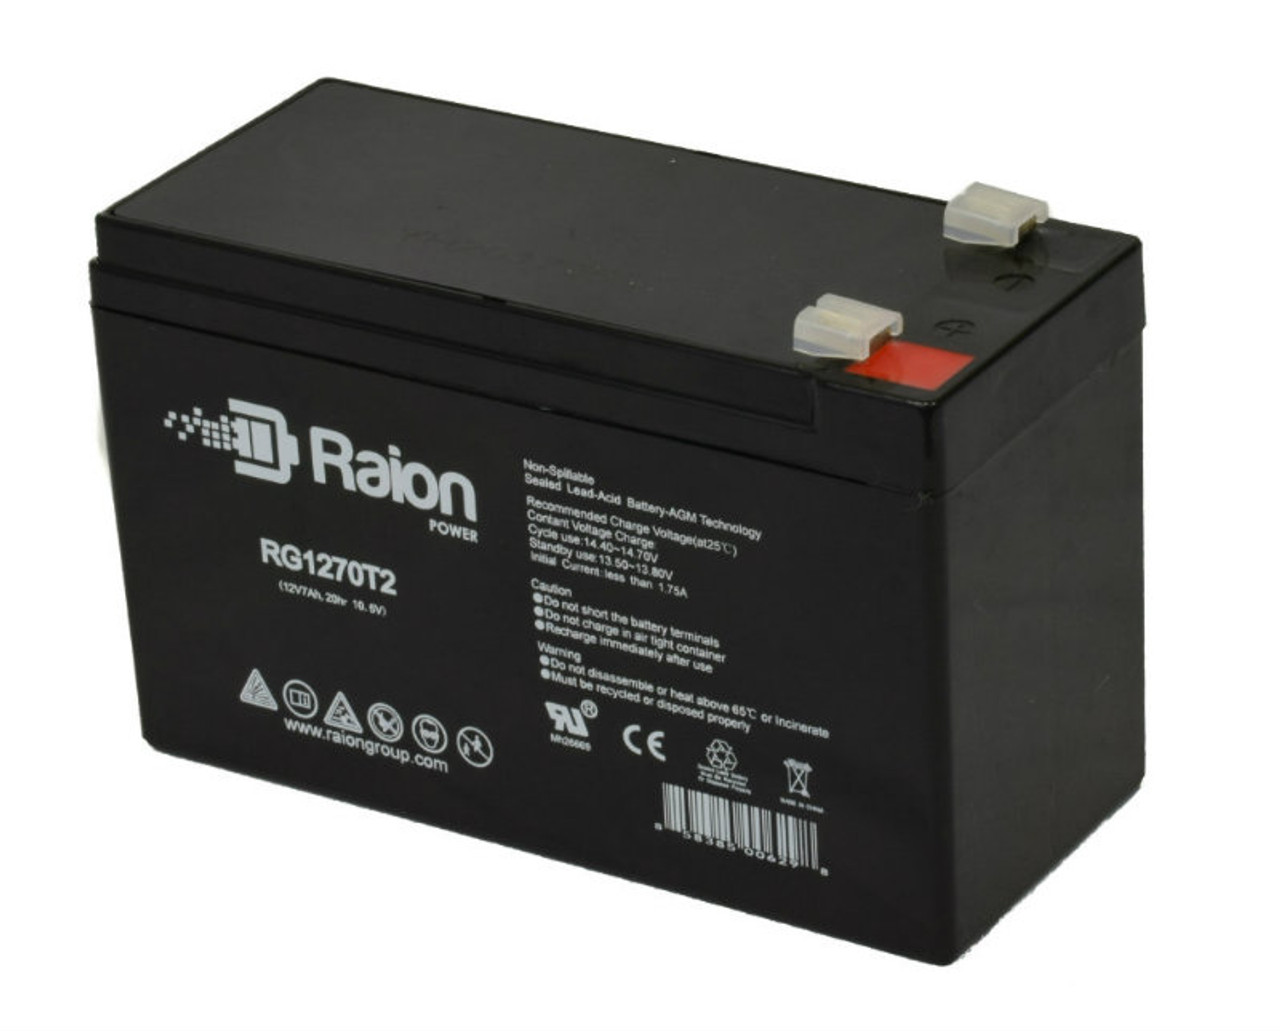 Raion Power RG1270T2 12V 7Ah Rechargeable Battery for GS Portalac PE12V7.2F2